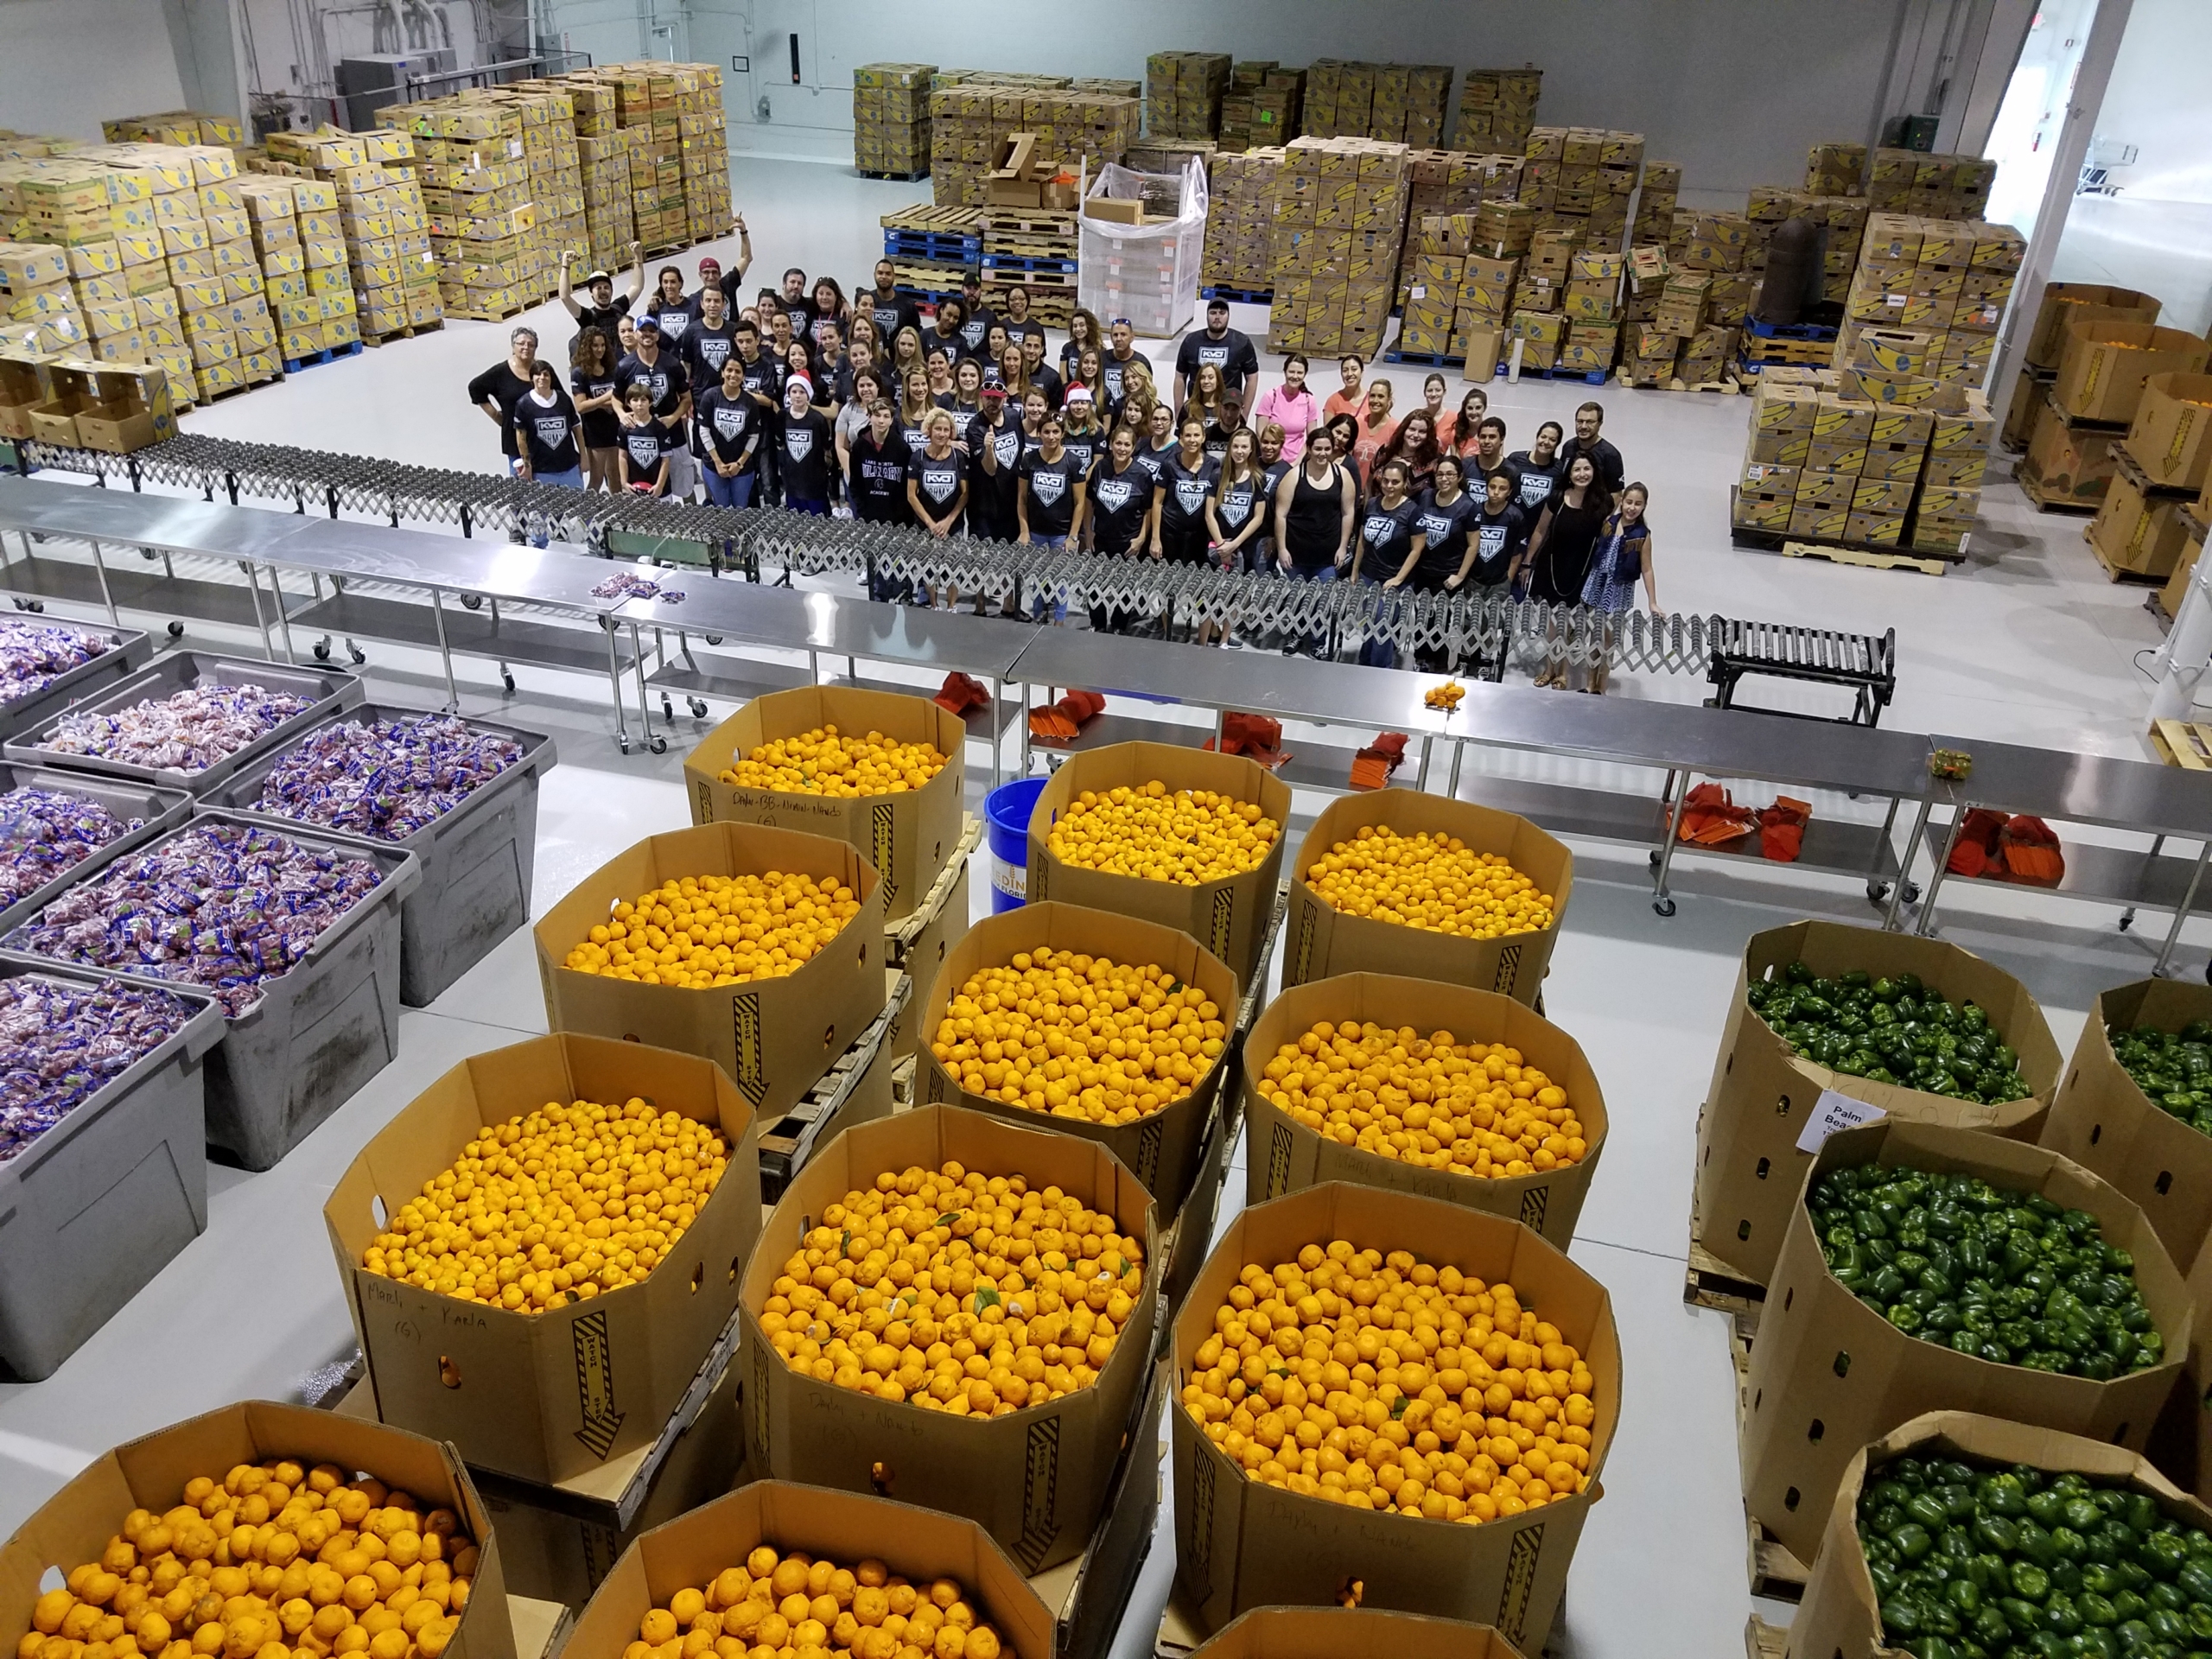 Feeding Florida seeks $5 million from state to distribute produce